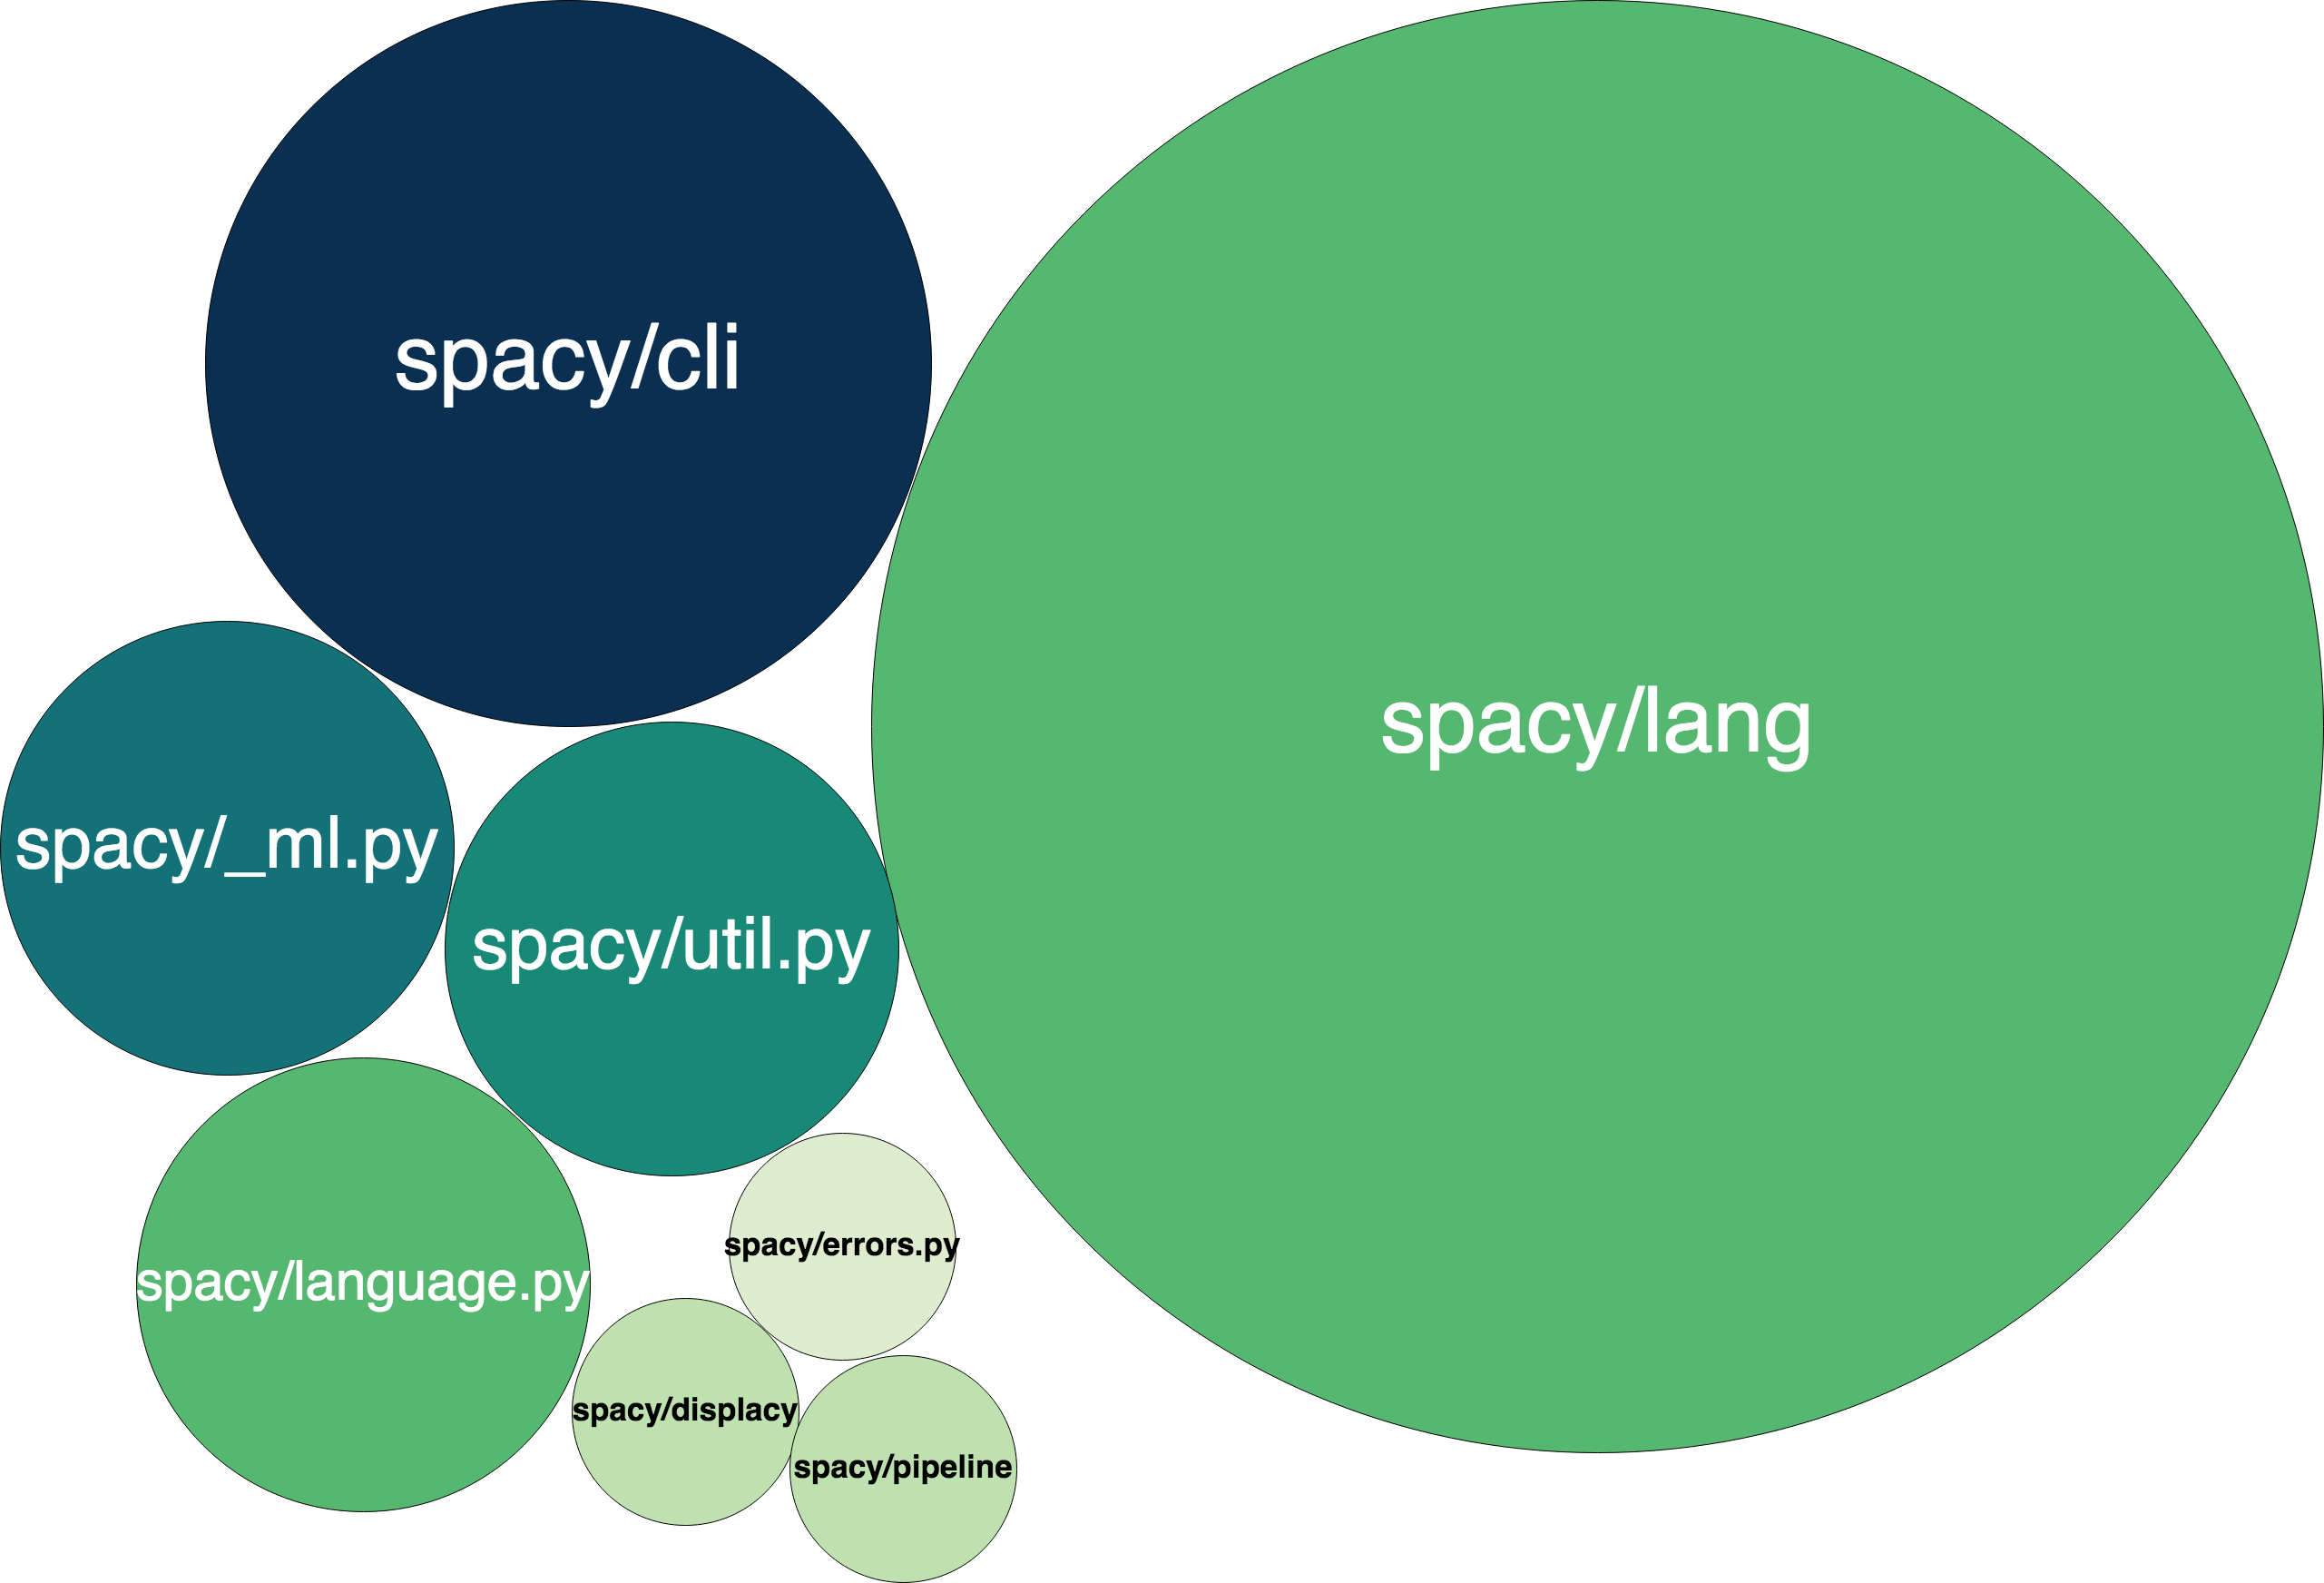 An overview of the test coverage. Each bubble is a major module or class whose size is proportional to the number of lines in the code. The darker and bluer a bubble is, the lesser is its coverage. `spacy/lang` which is one of spaCy's largest modules is covered quite well (line coverage of 71%), however `spacy/cli` and `spacy/_ml` have poor coverage metrics (19% and 53% respectively).